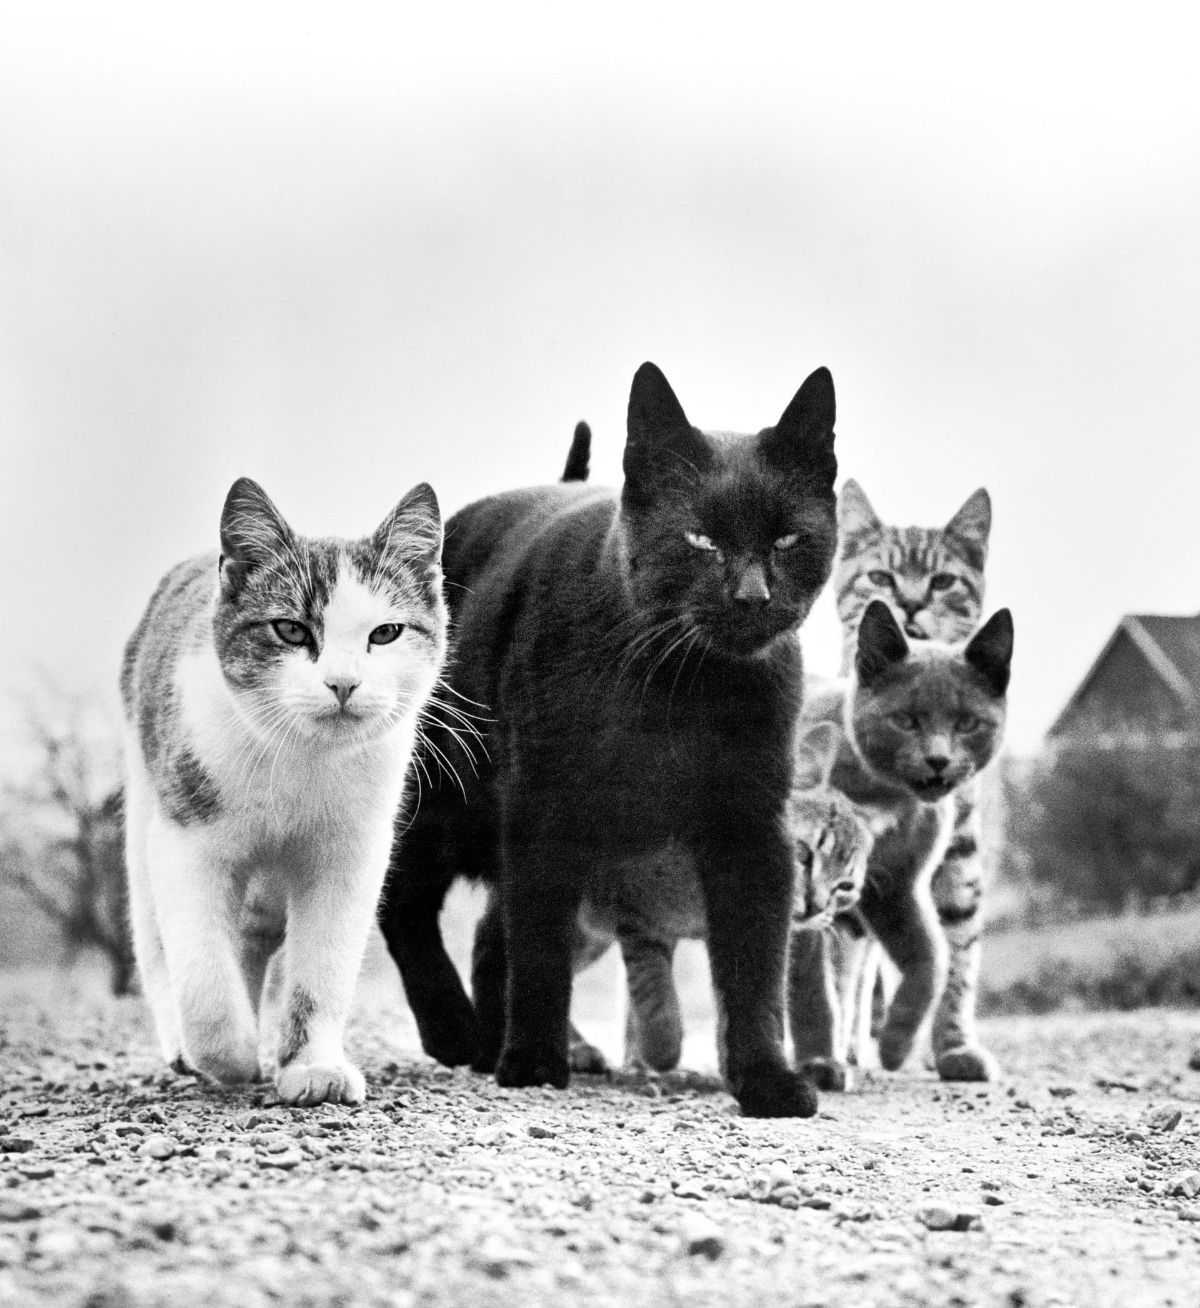 A clowder of ominous looking felines in one of the photographer’s most famous works, titled The Mob. New Jersey, 1961.